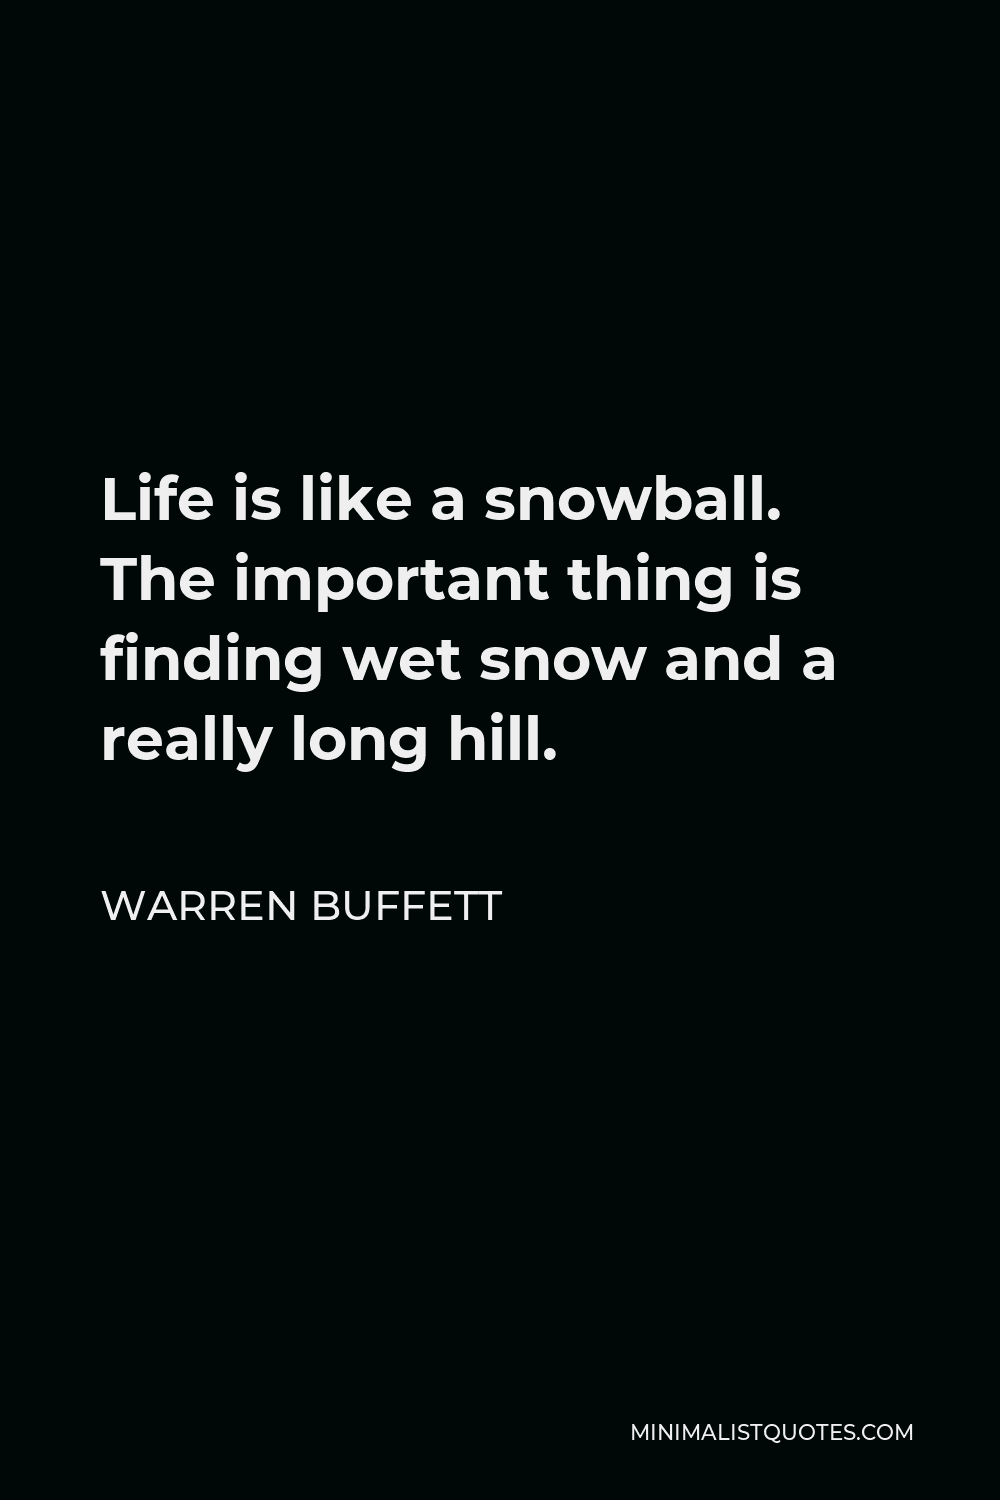 Warren Buffett Quote: Life is like a snowball. The important thing is finding wet snow and a really long hill.